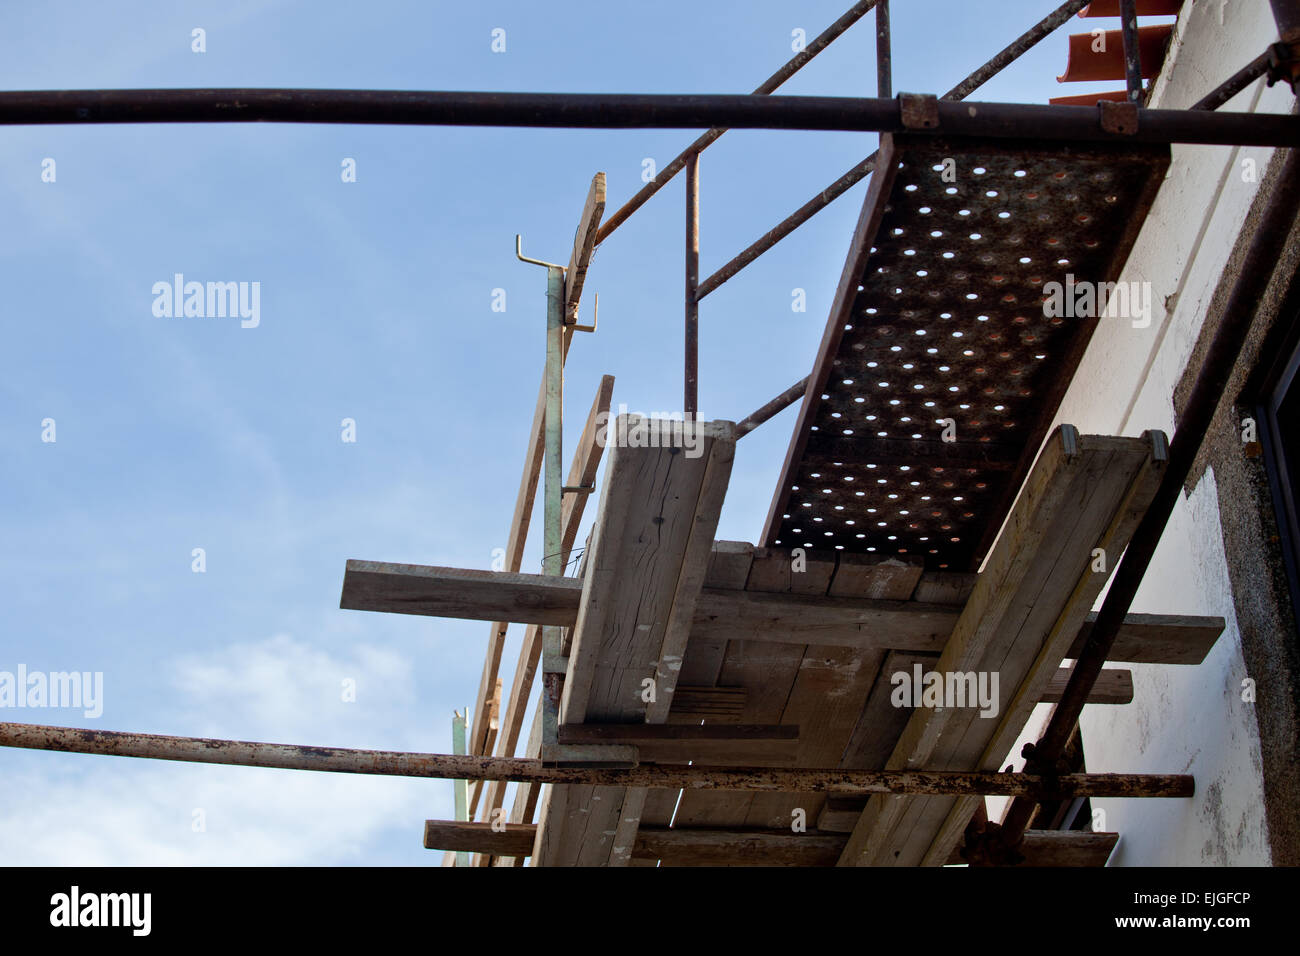 Rural building facade under reconstruction with old scaffoldings Stock Photo